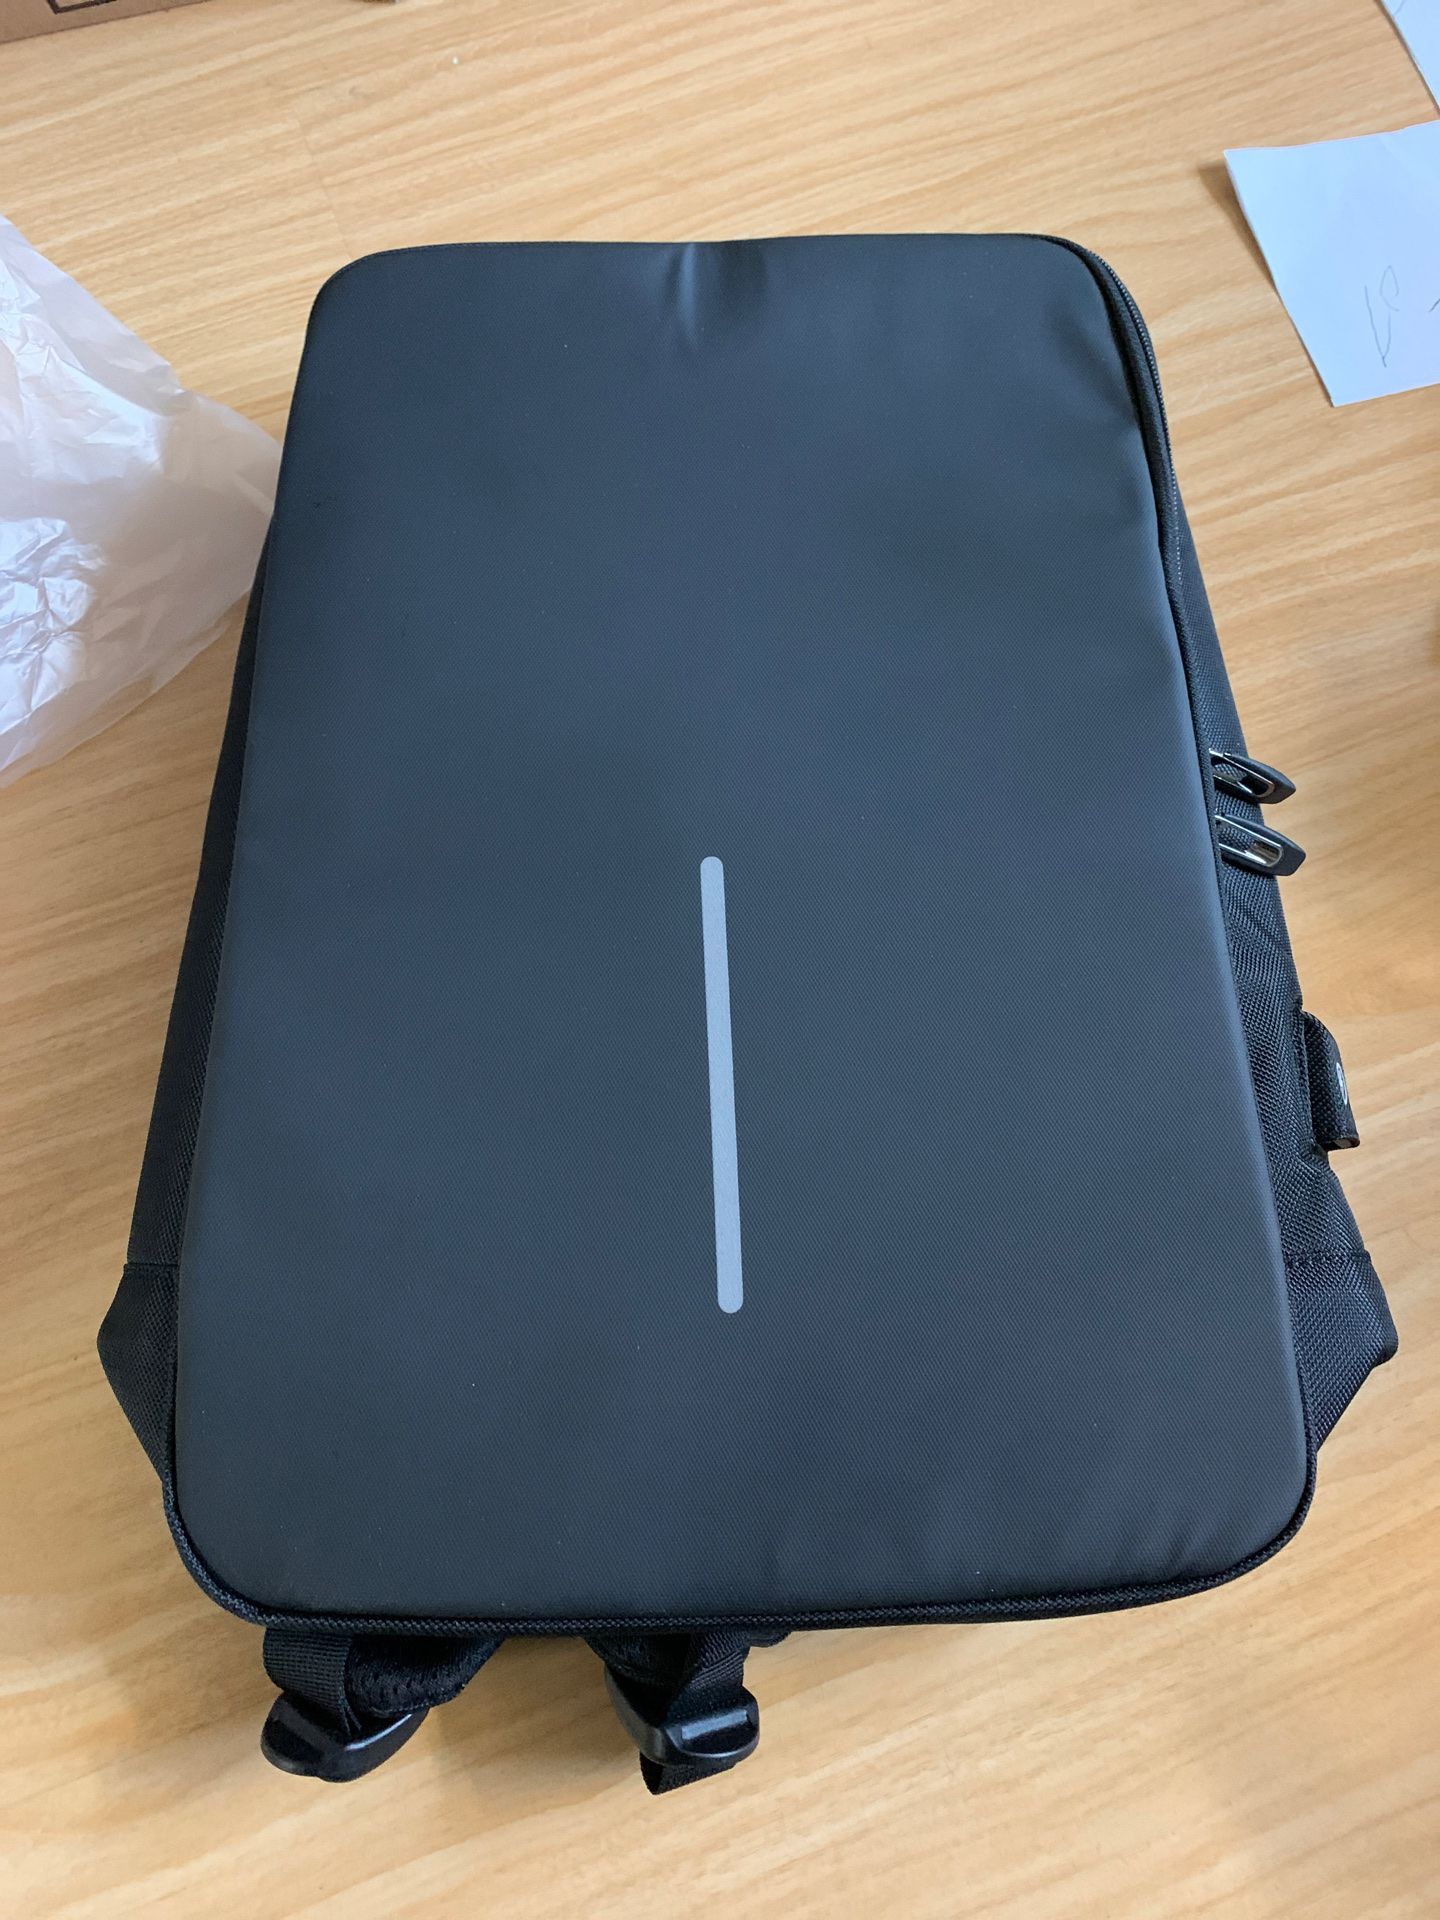 Laptop backpack with UBS charger